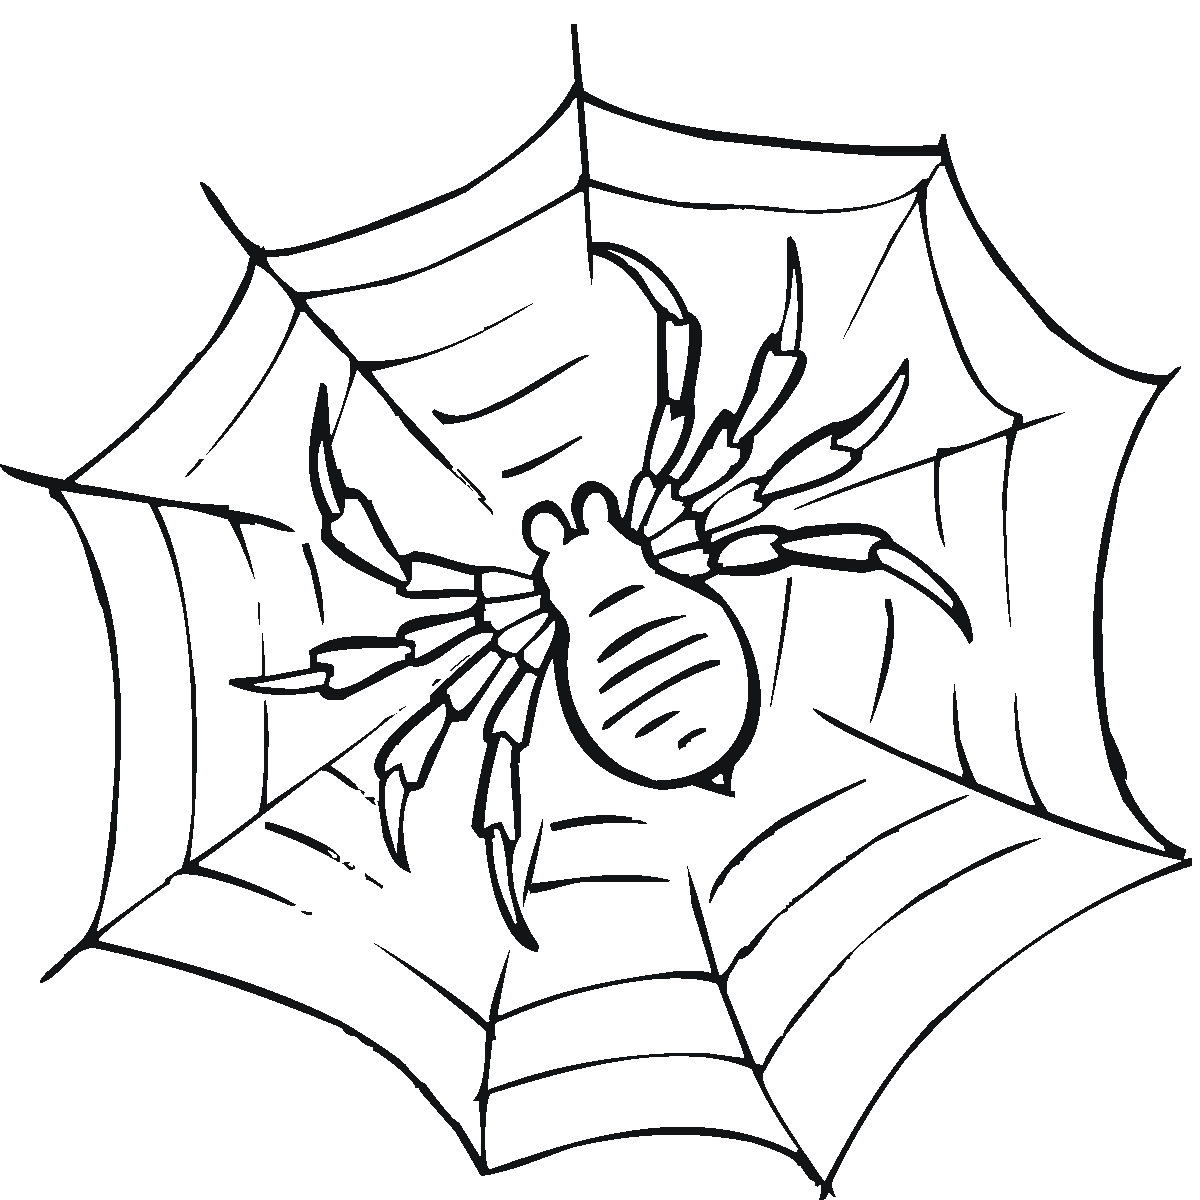 Spider coloring pages to download and print for free